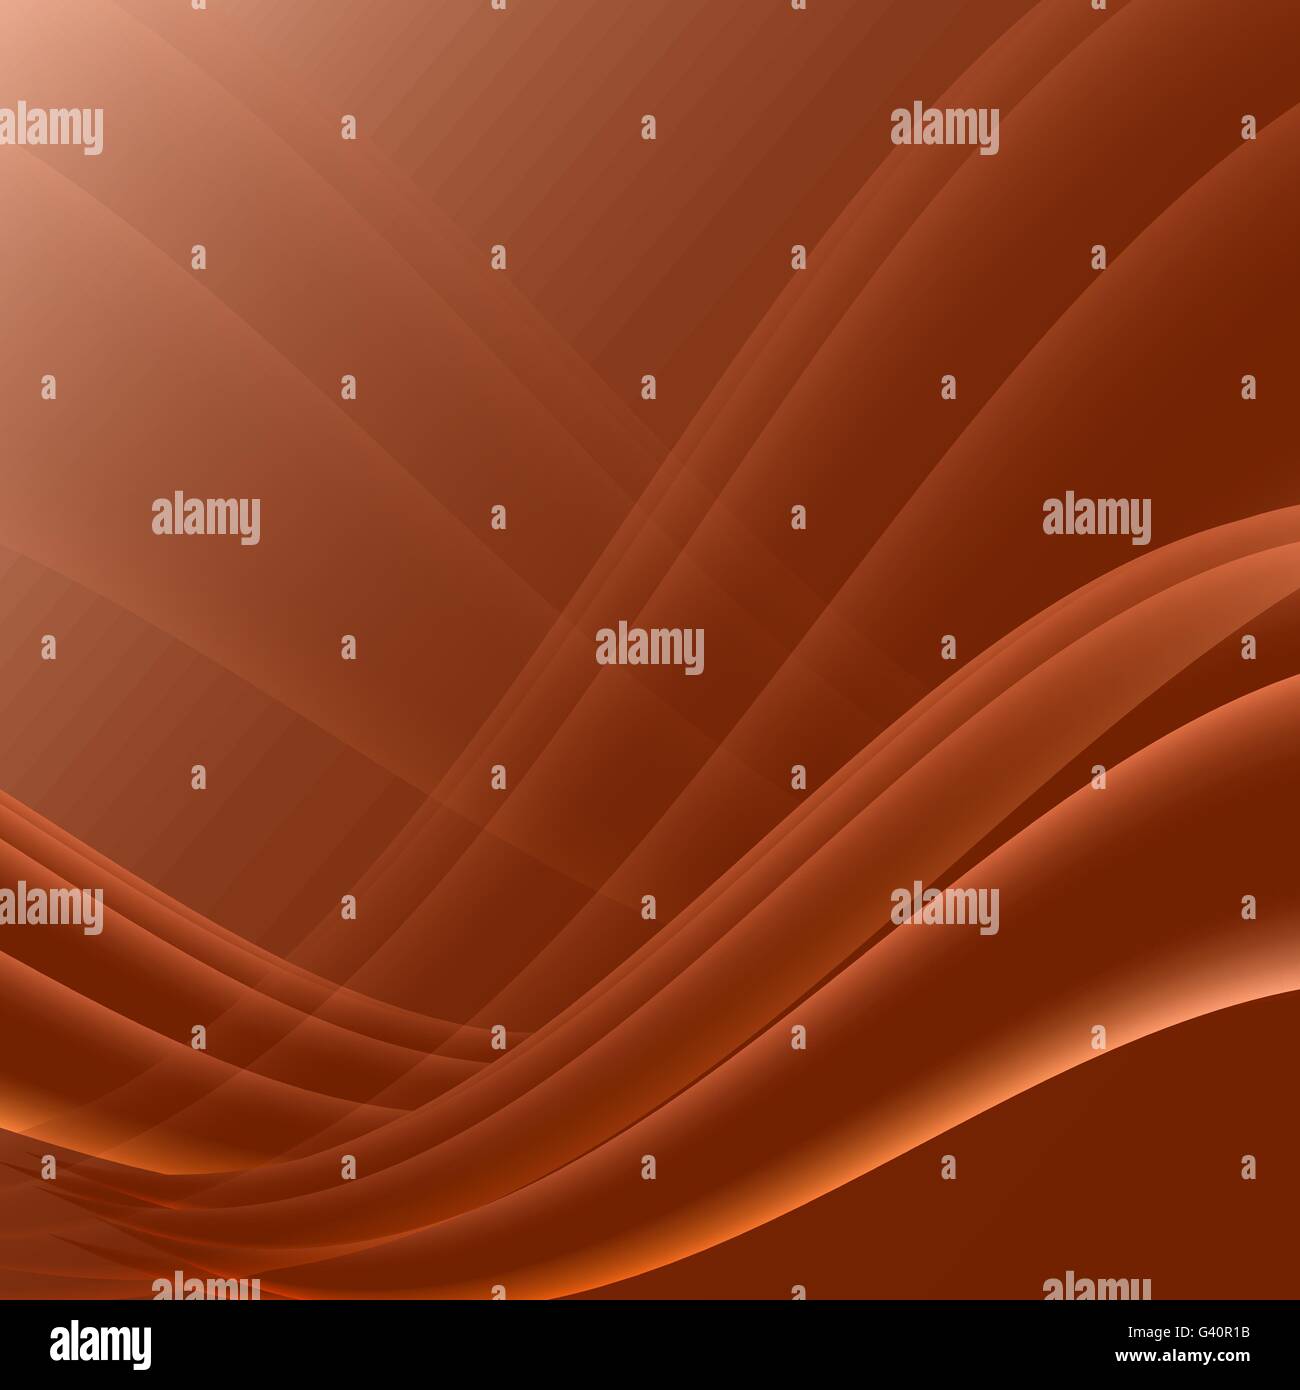 Orange and black waves modern futuristic abstract background, stock vector Stock Vector